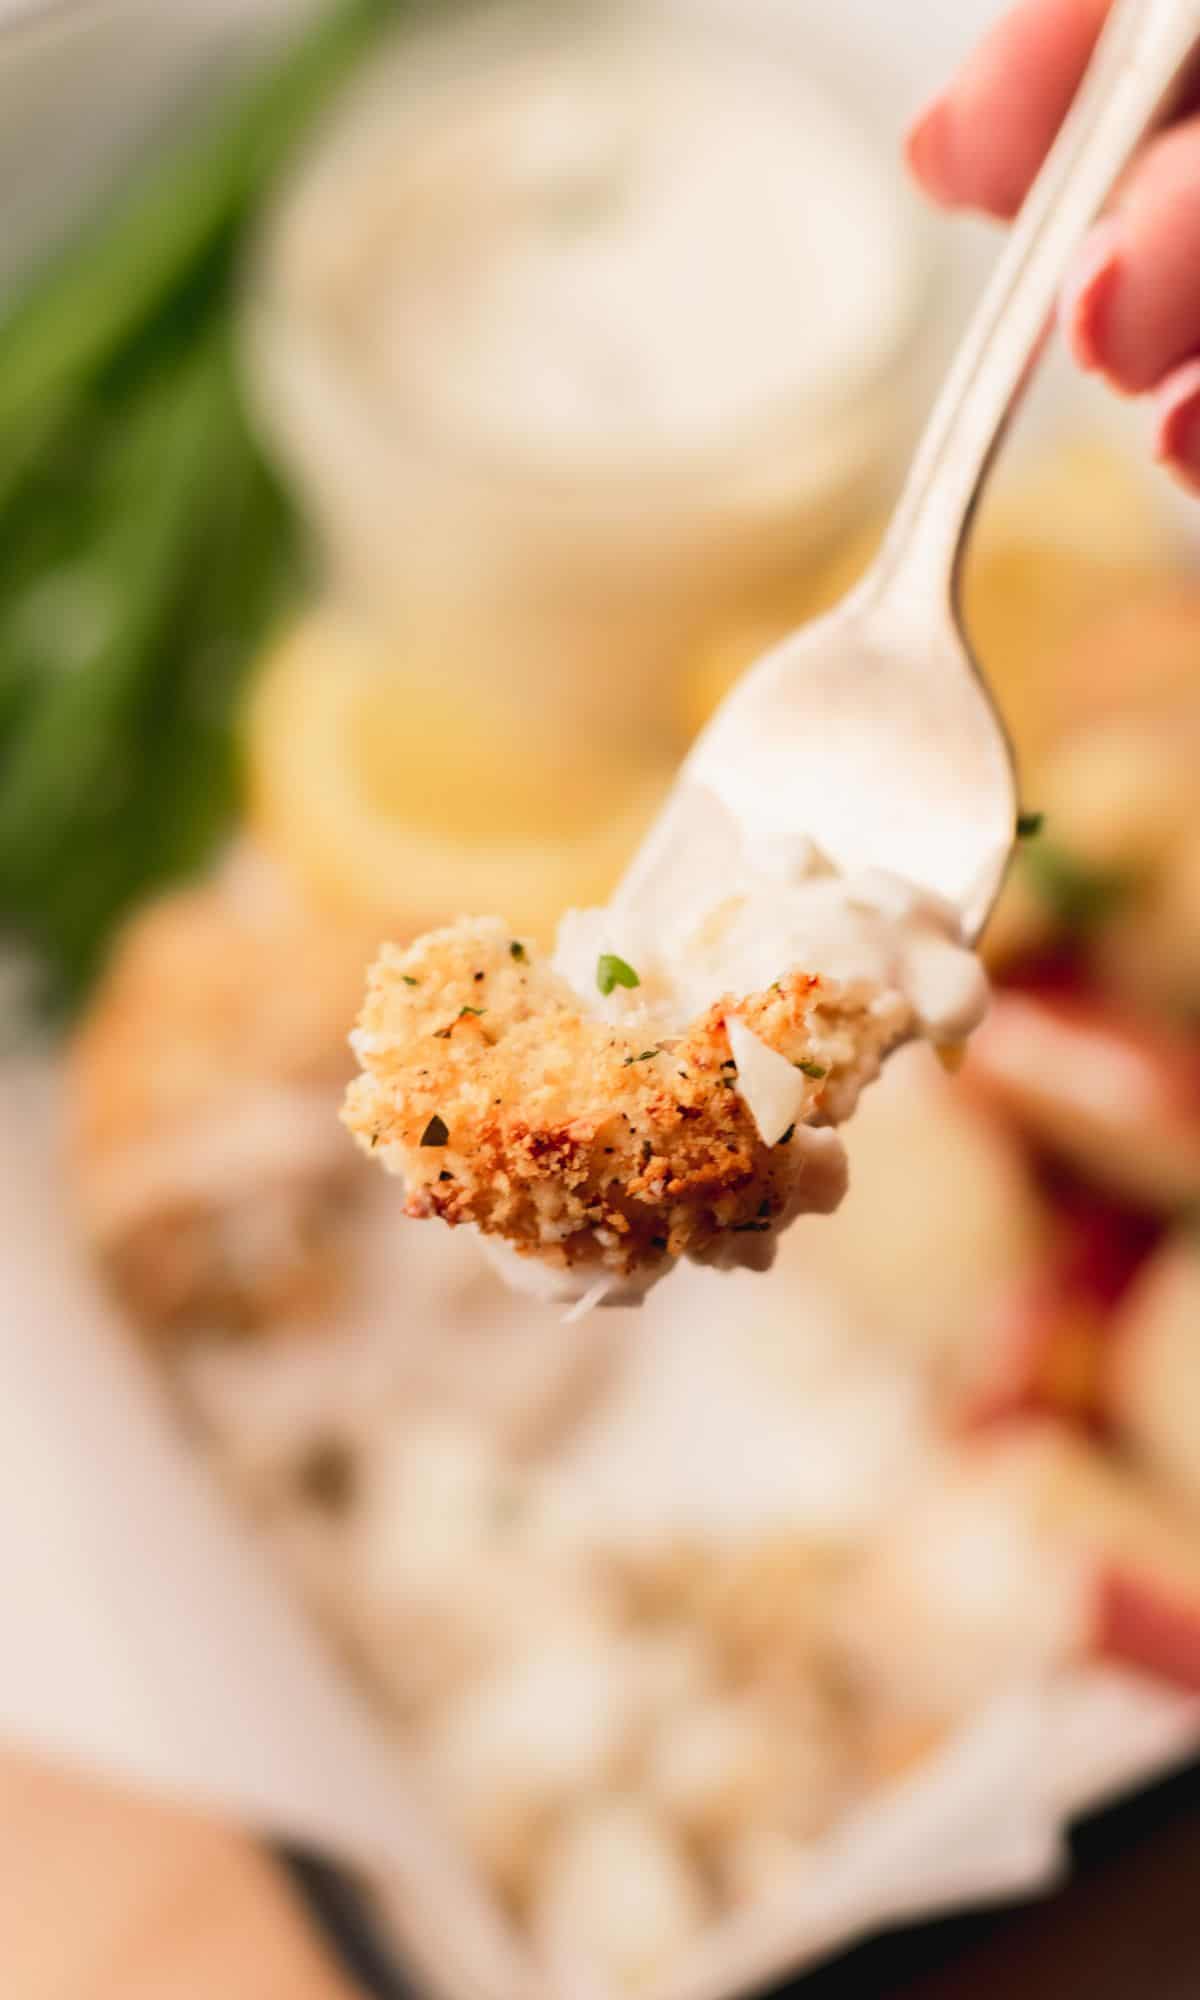 A bite of parmesan panko baked cod on a fork.